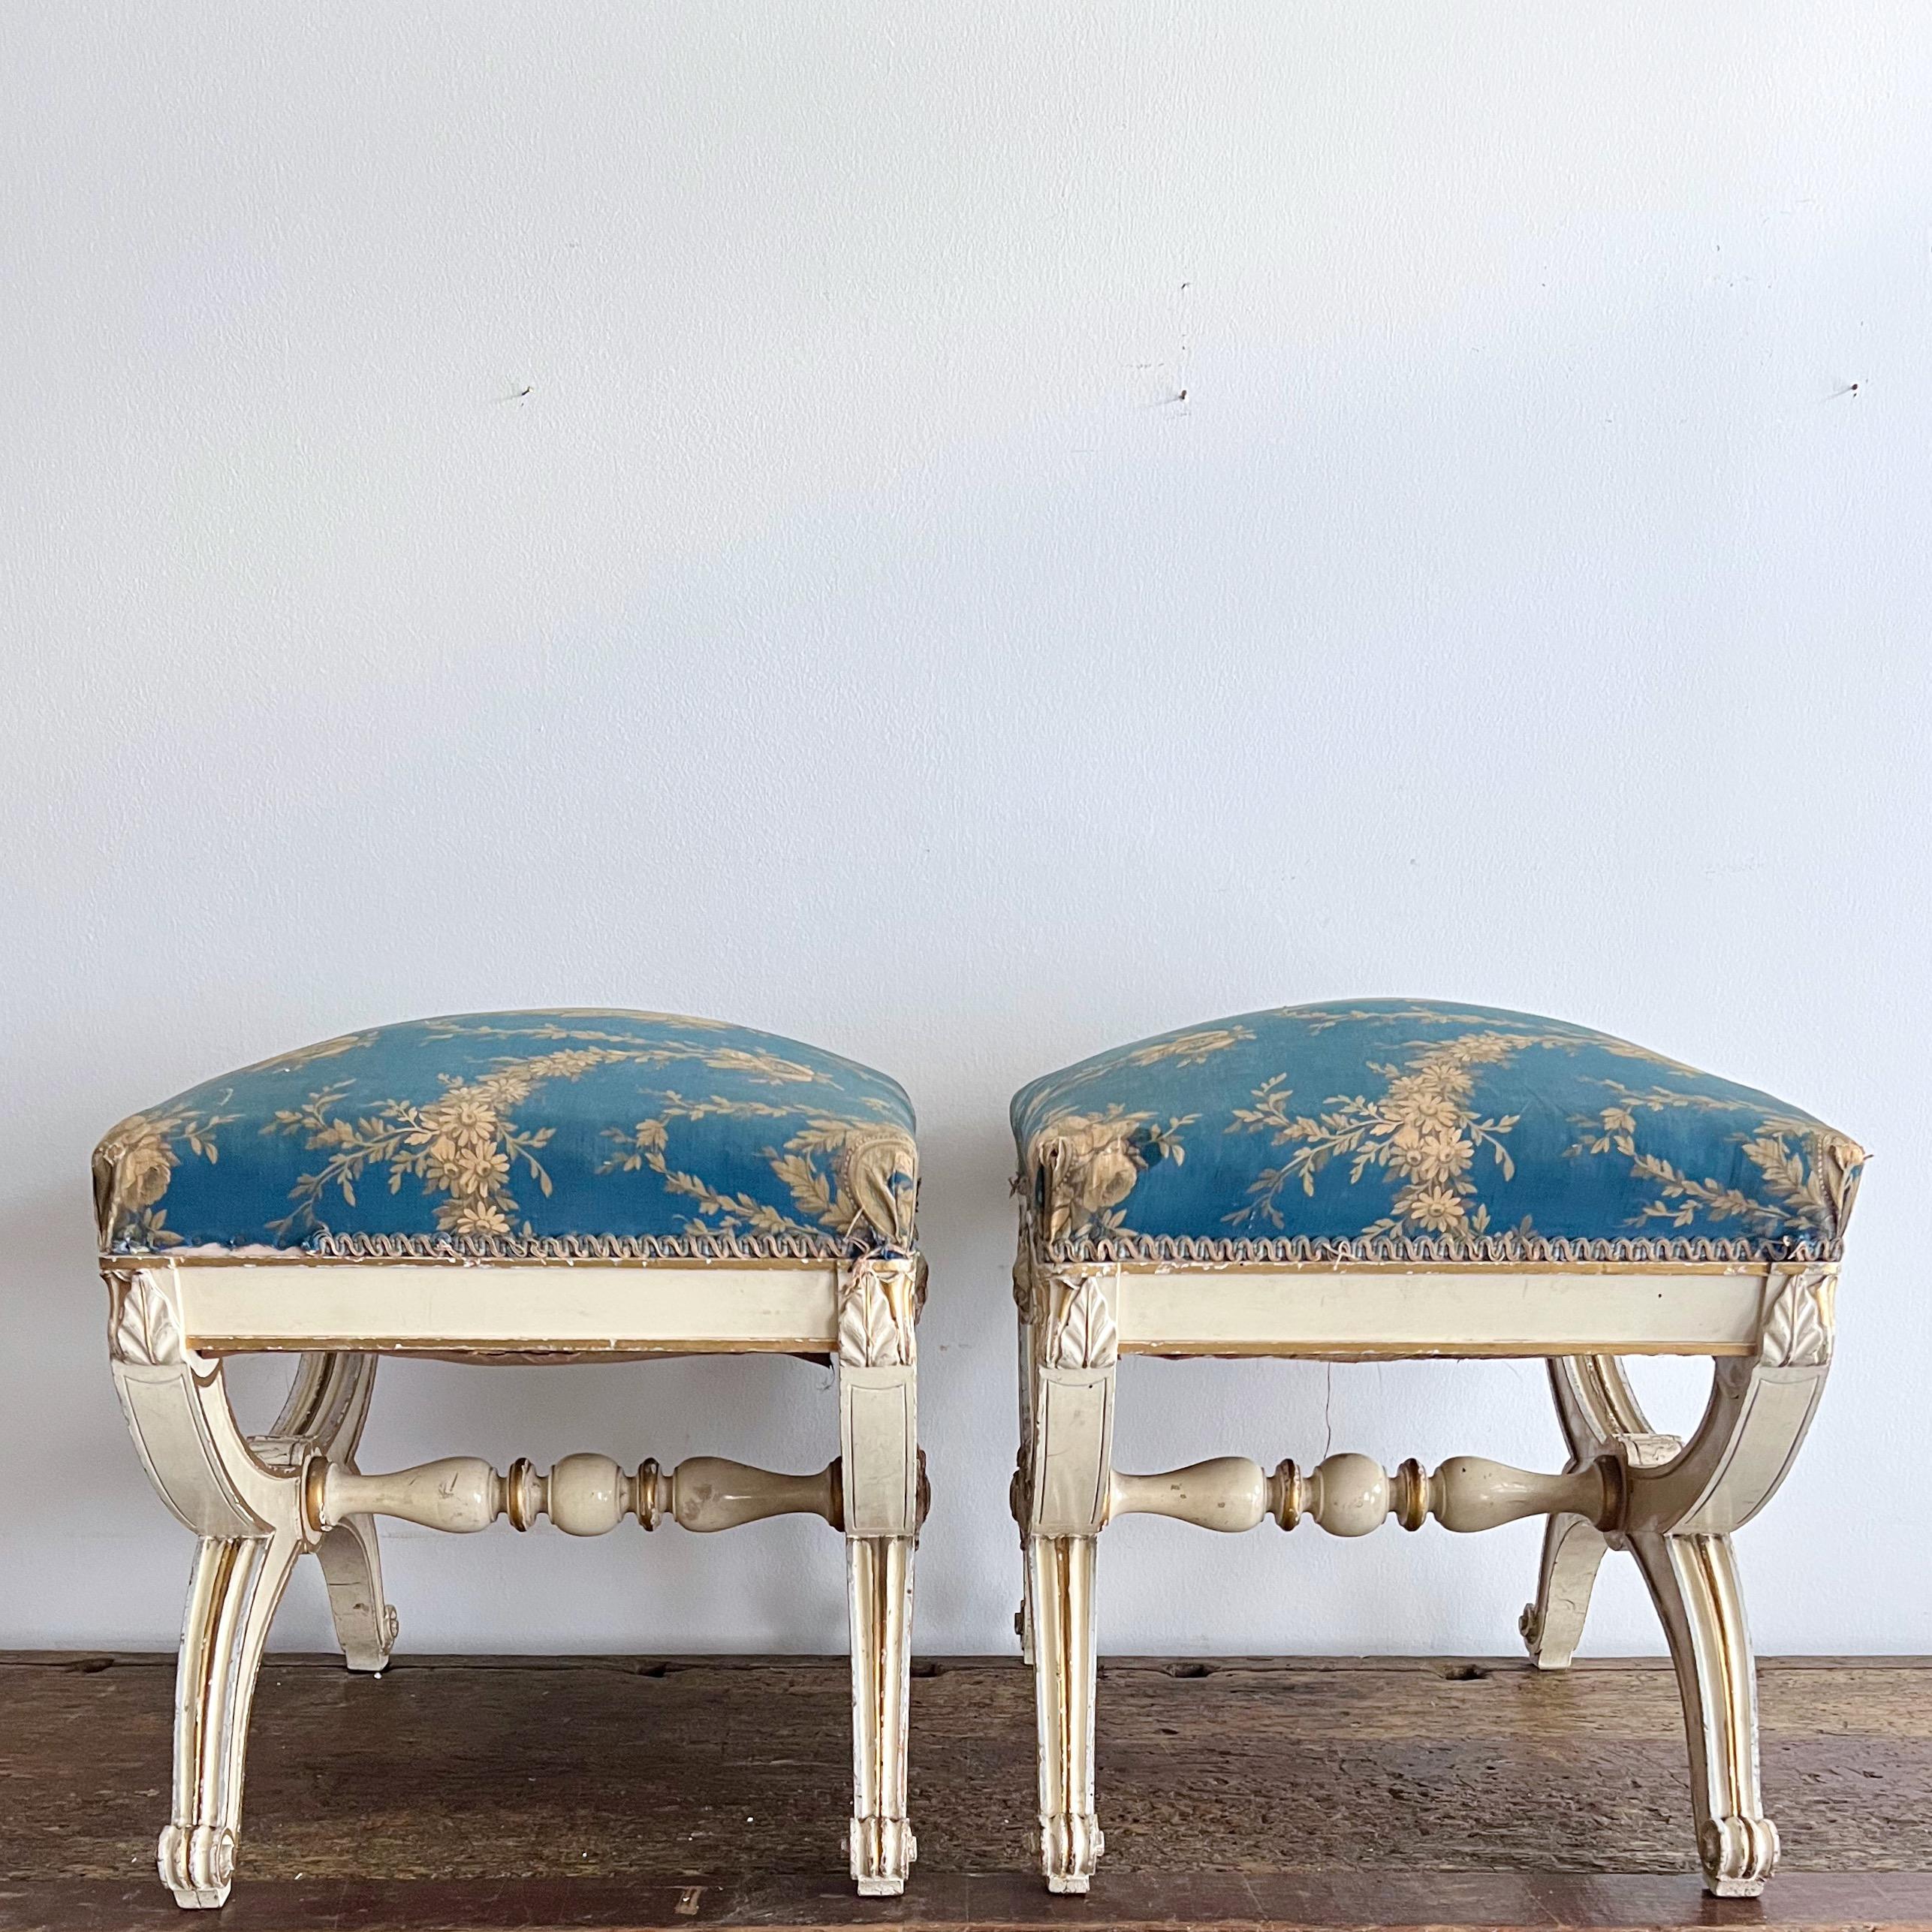 Fabric Pair of 19th century Italian Polychrome and Parcel-Gilt Curule Stools For Sale